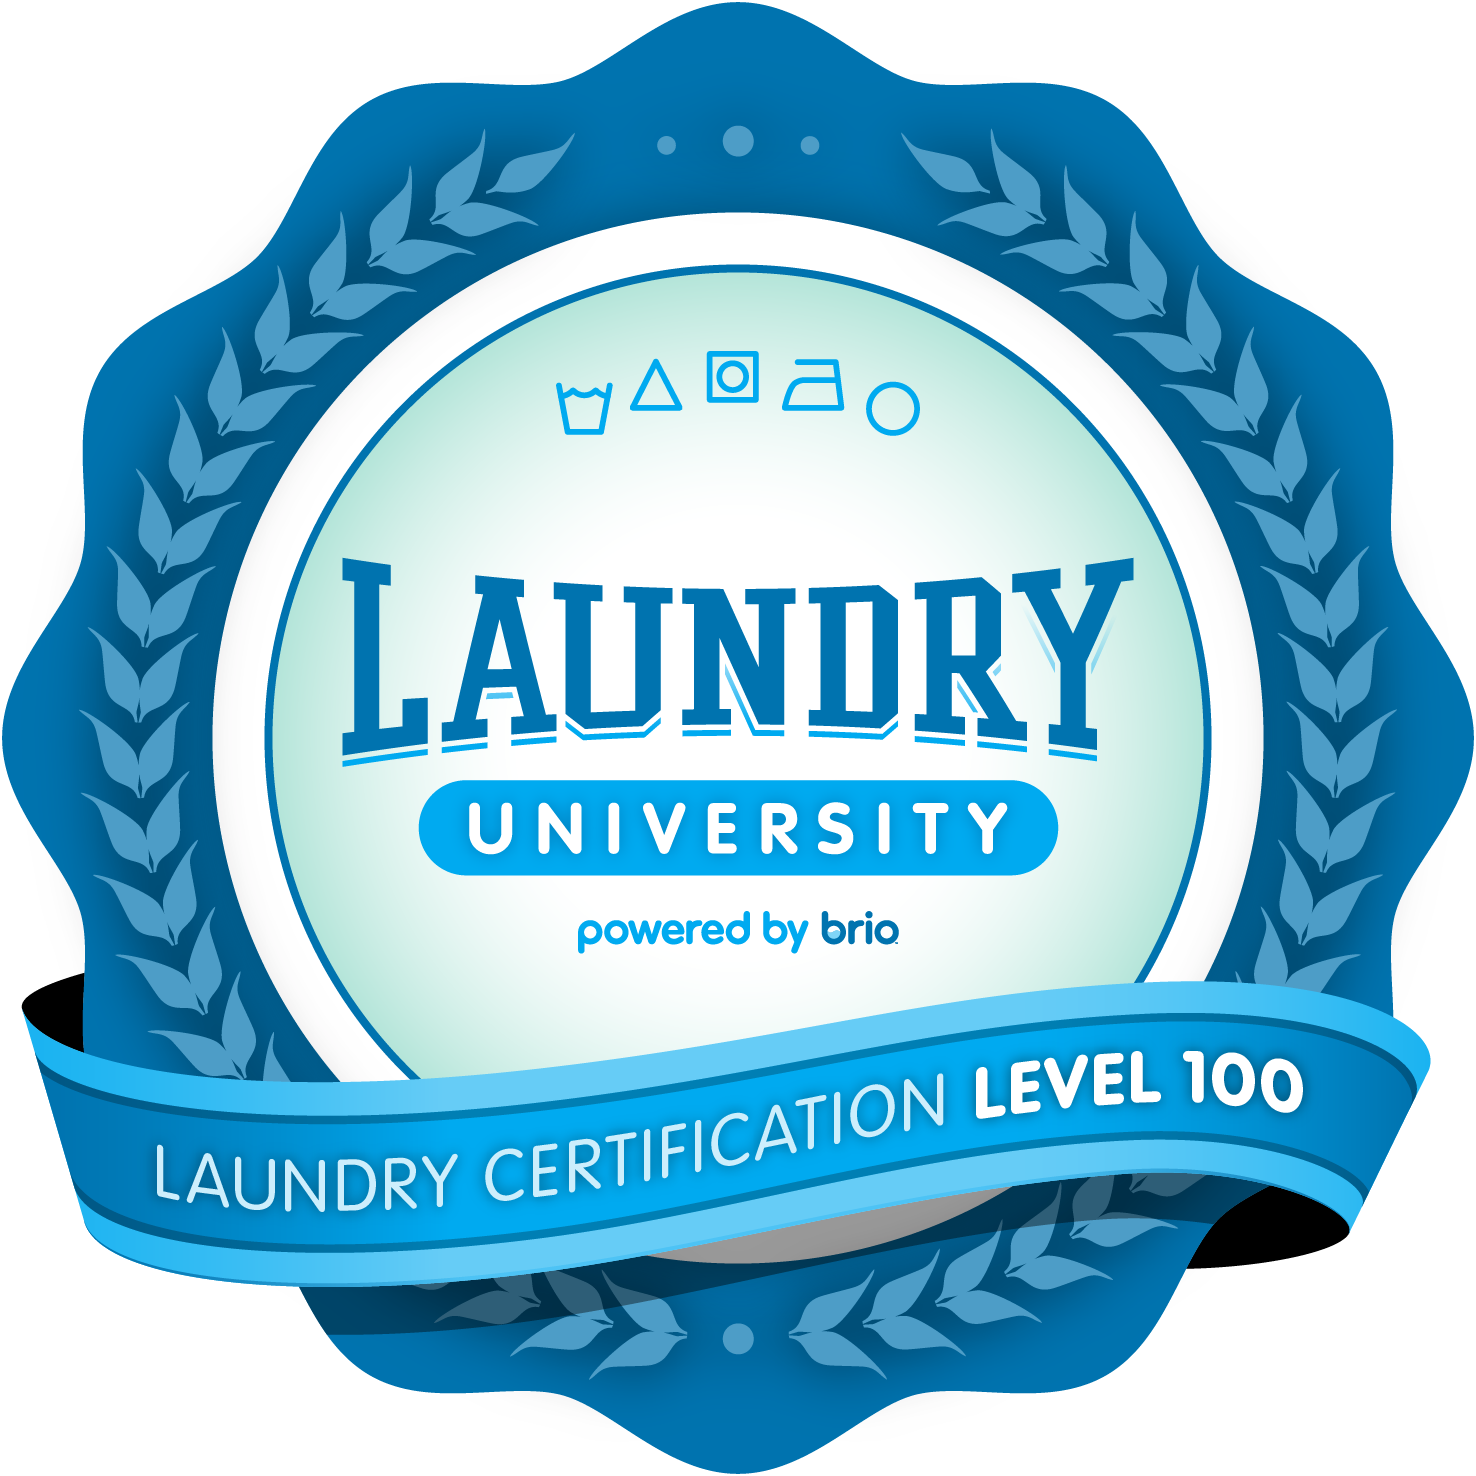 103: Pre-treatment of Soiled Laundry